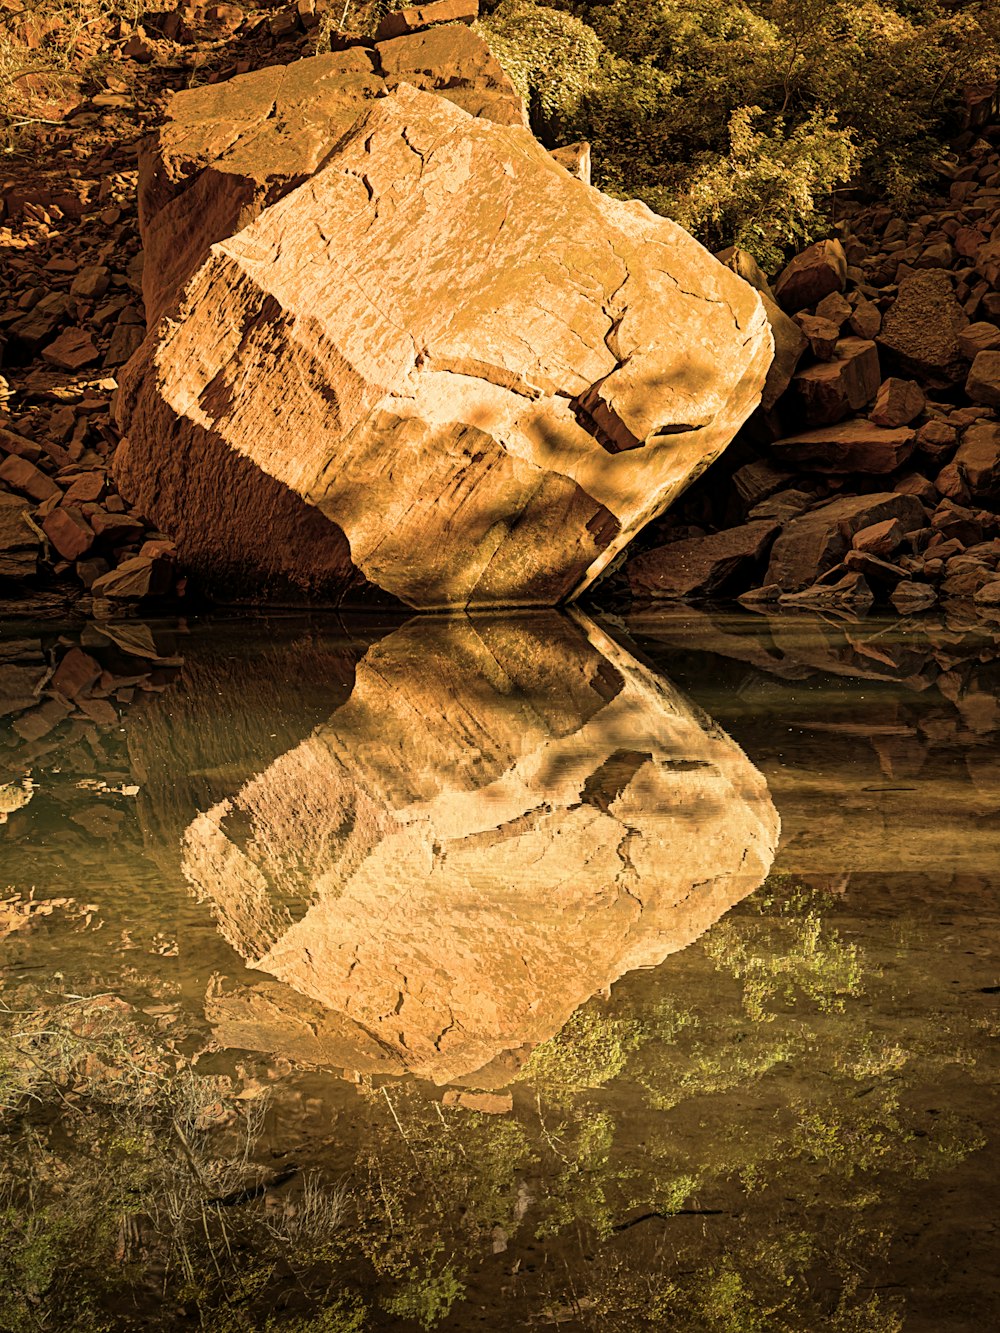 a large rock sitting in the middle of a body of water